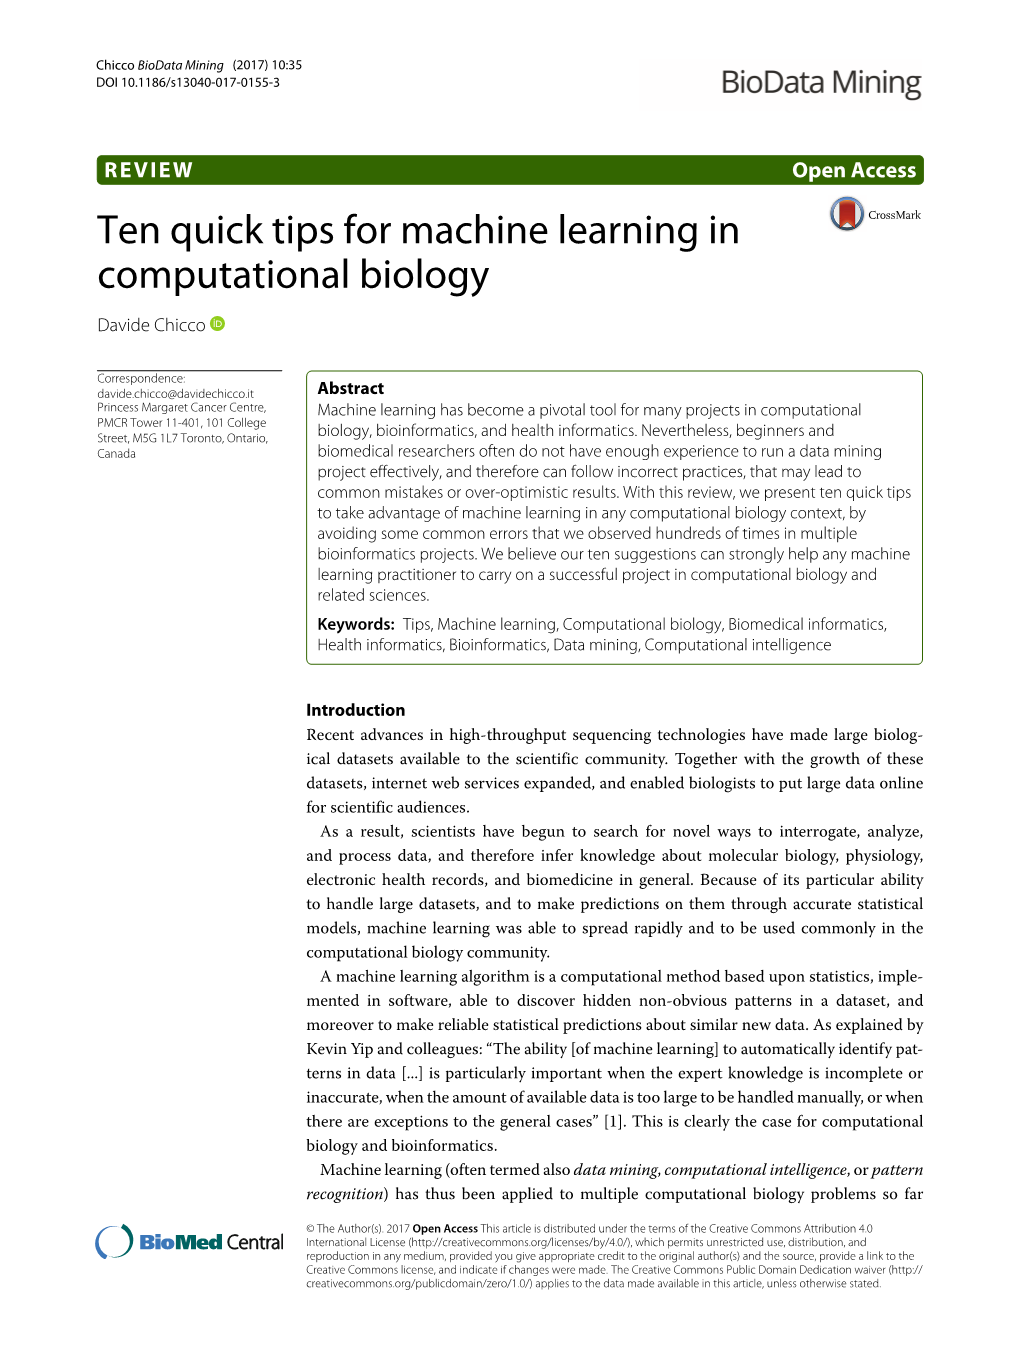 Ten Quick Tips for Machine Learning in Computational Biology